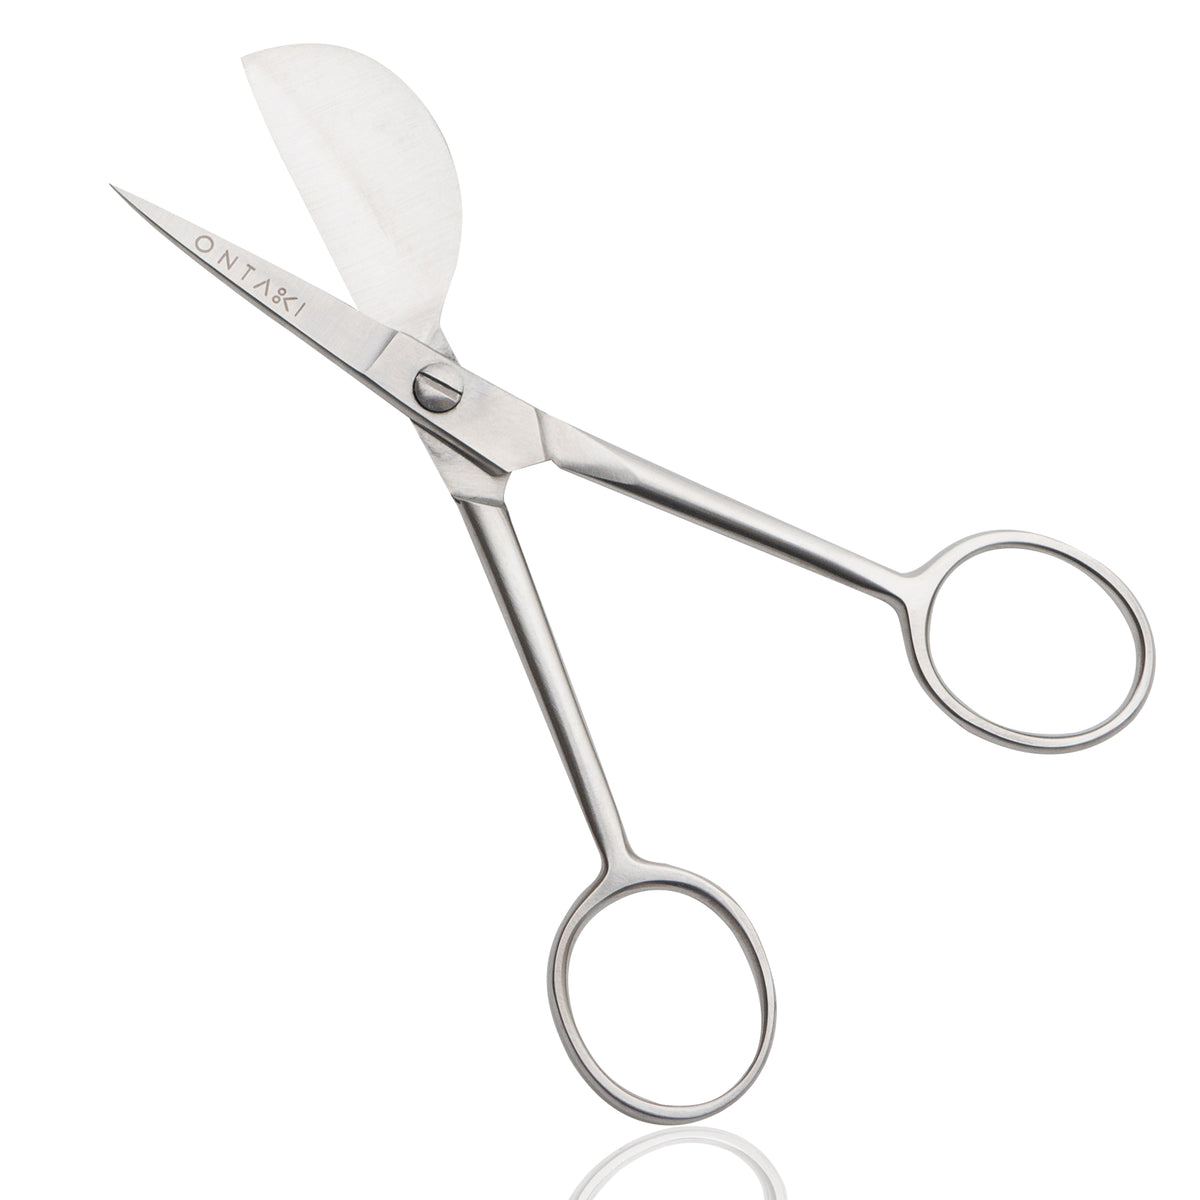 20 PELICAN BILL APPLIQUE SCISSORS STAINLESS STEEL – Embroidery